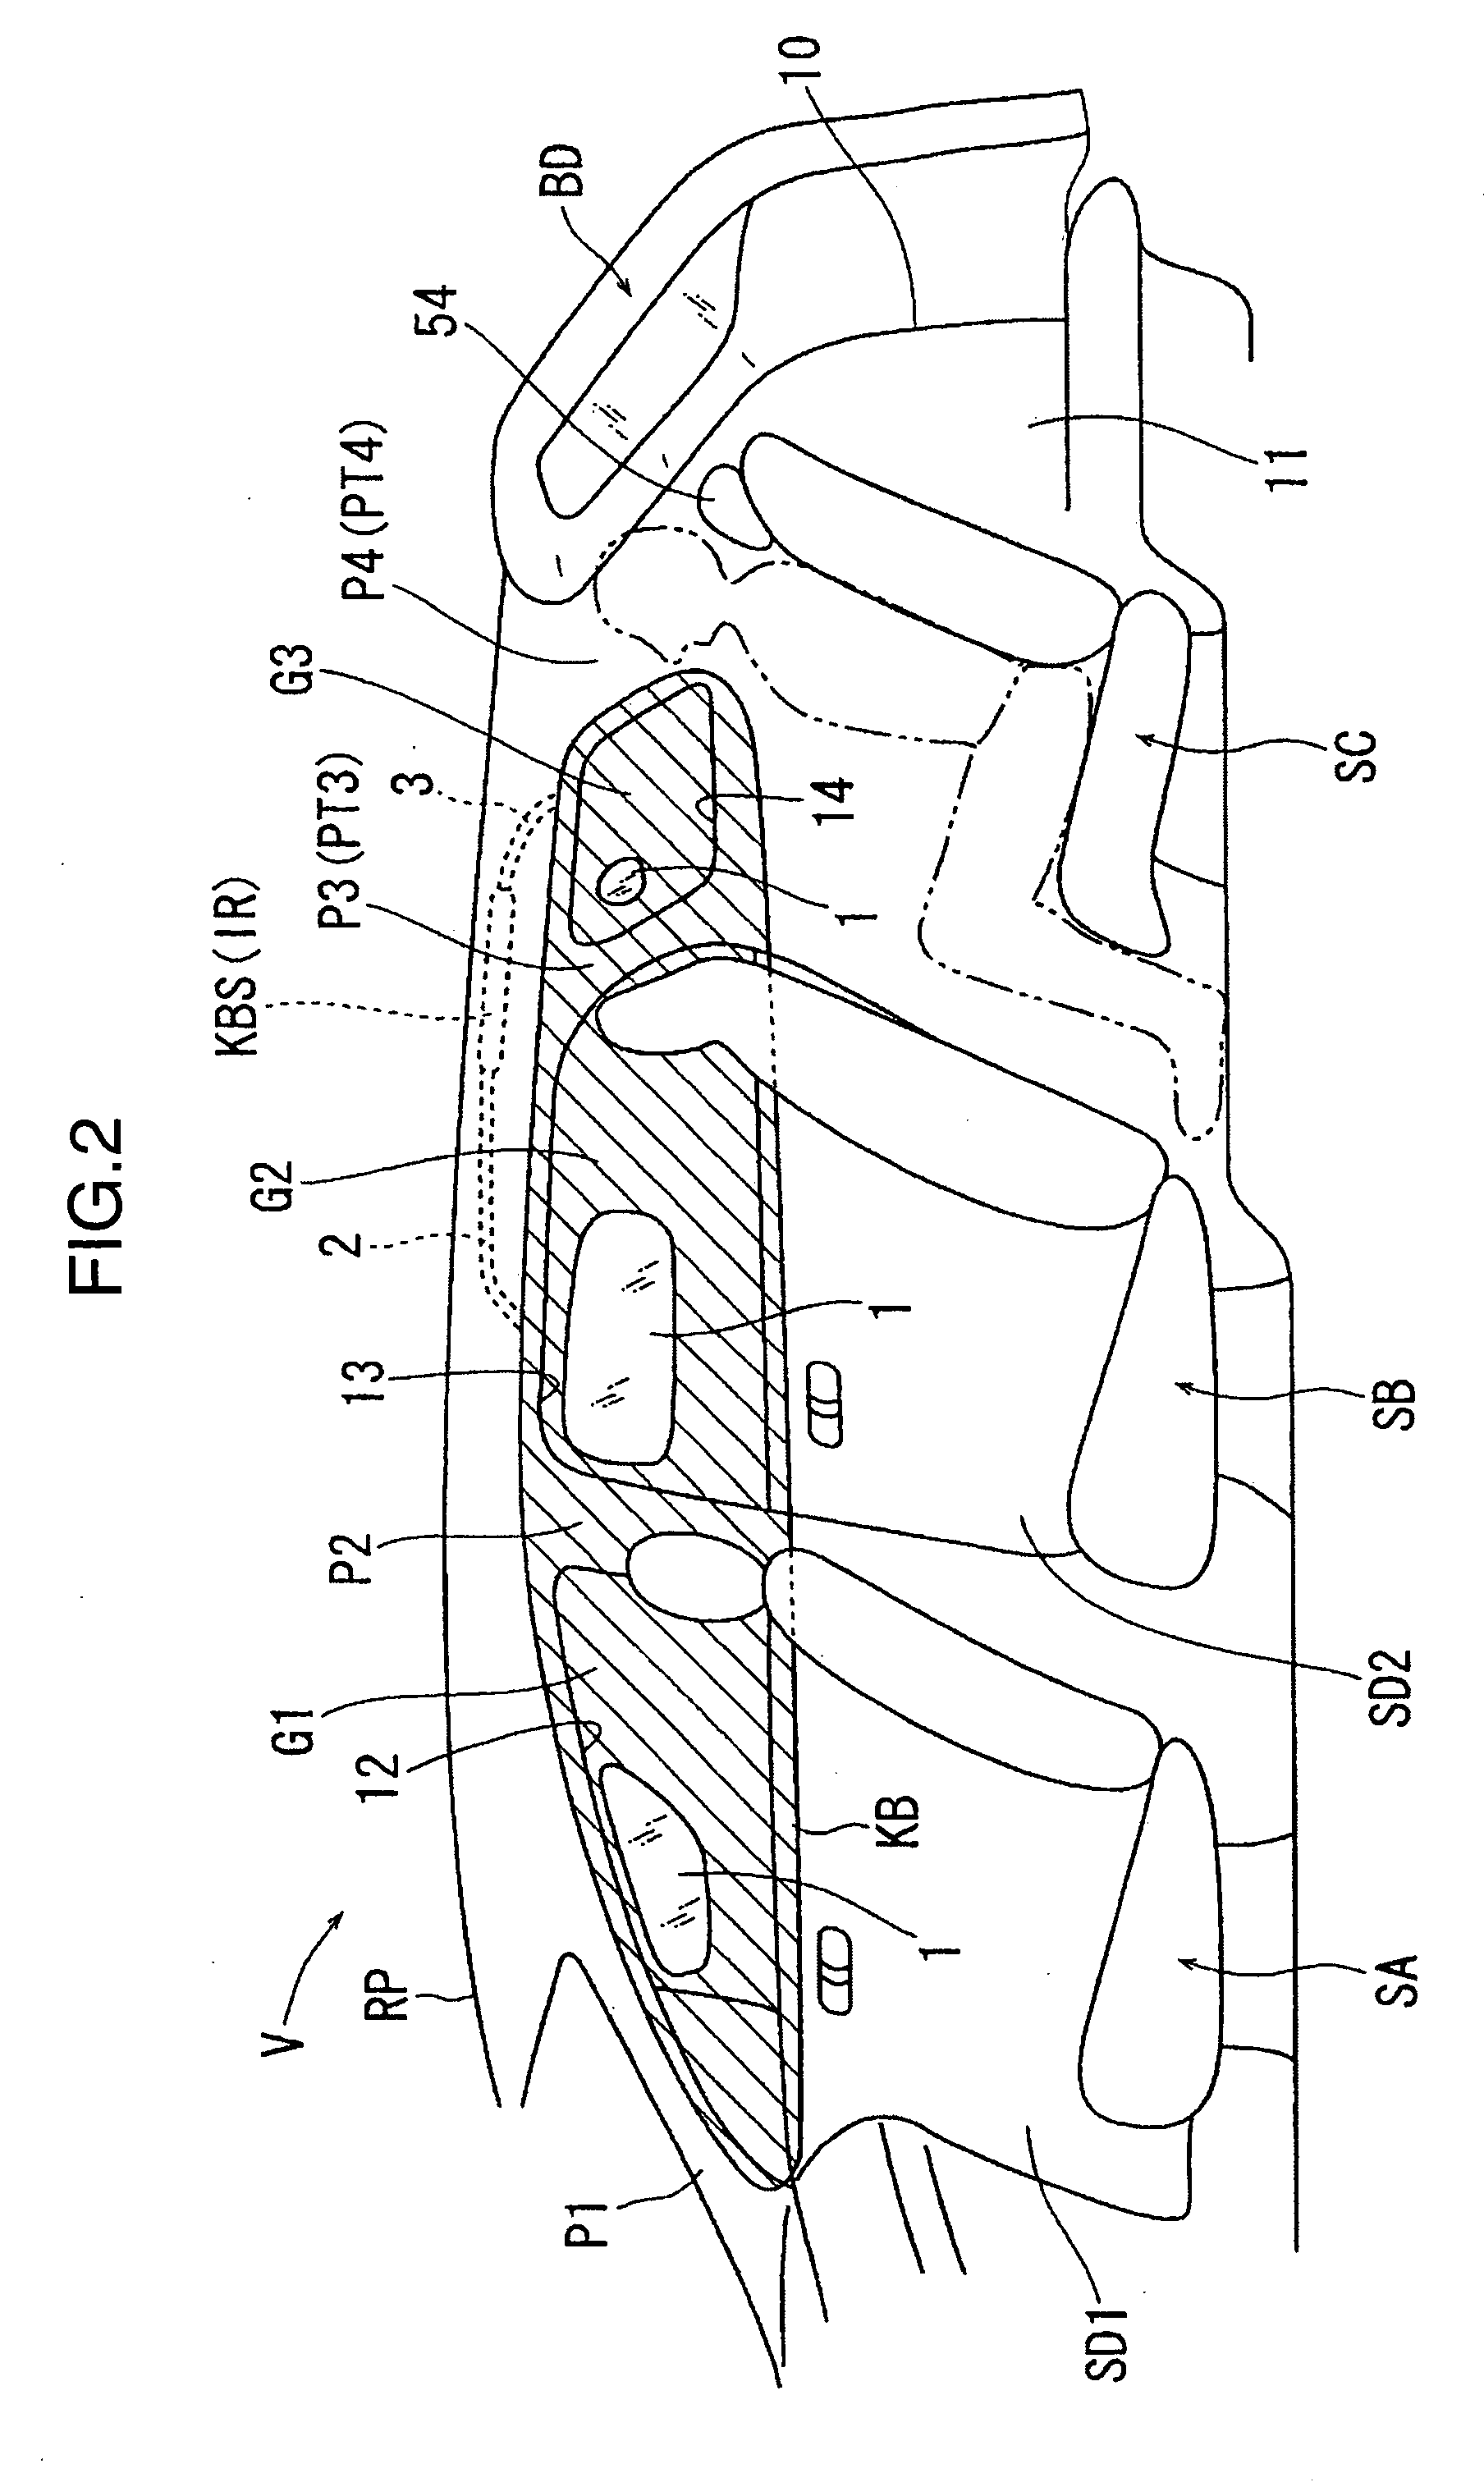 Rear structure of vehicle provided with curtain air bag apparatus